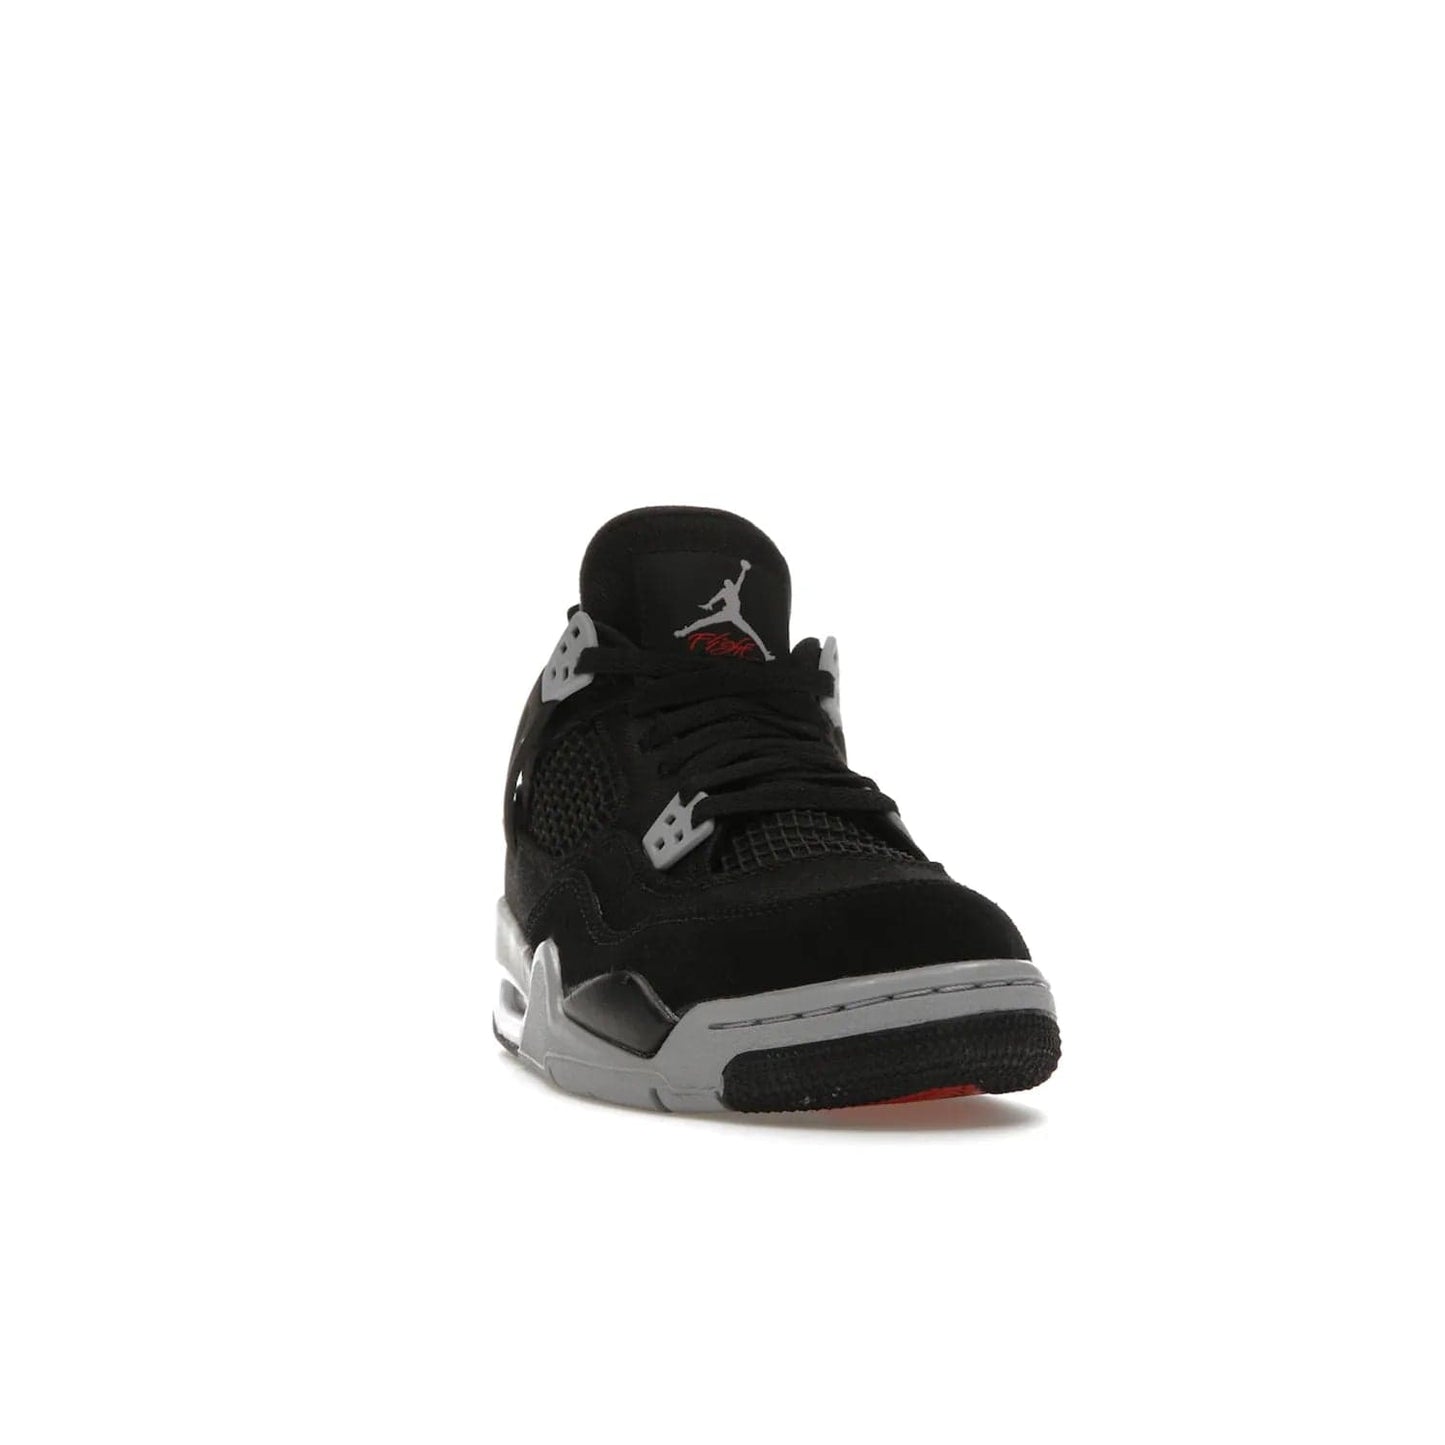 Jordan 4 Retro Black Canvas (GS) - Image 8 - Only at www.BallersClubKickz.com - Premium Air Jordan 4 Retro Black Canvas in grade-schooler's catalog. Featuring black suede canvas upper, grey molding, accents in red, white midsole, woven Jumpman tag, & visible AIR cushioning. Releasing Oct. 1, 2022.